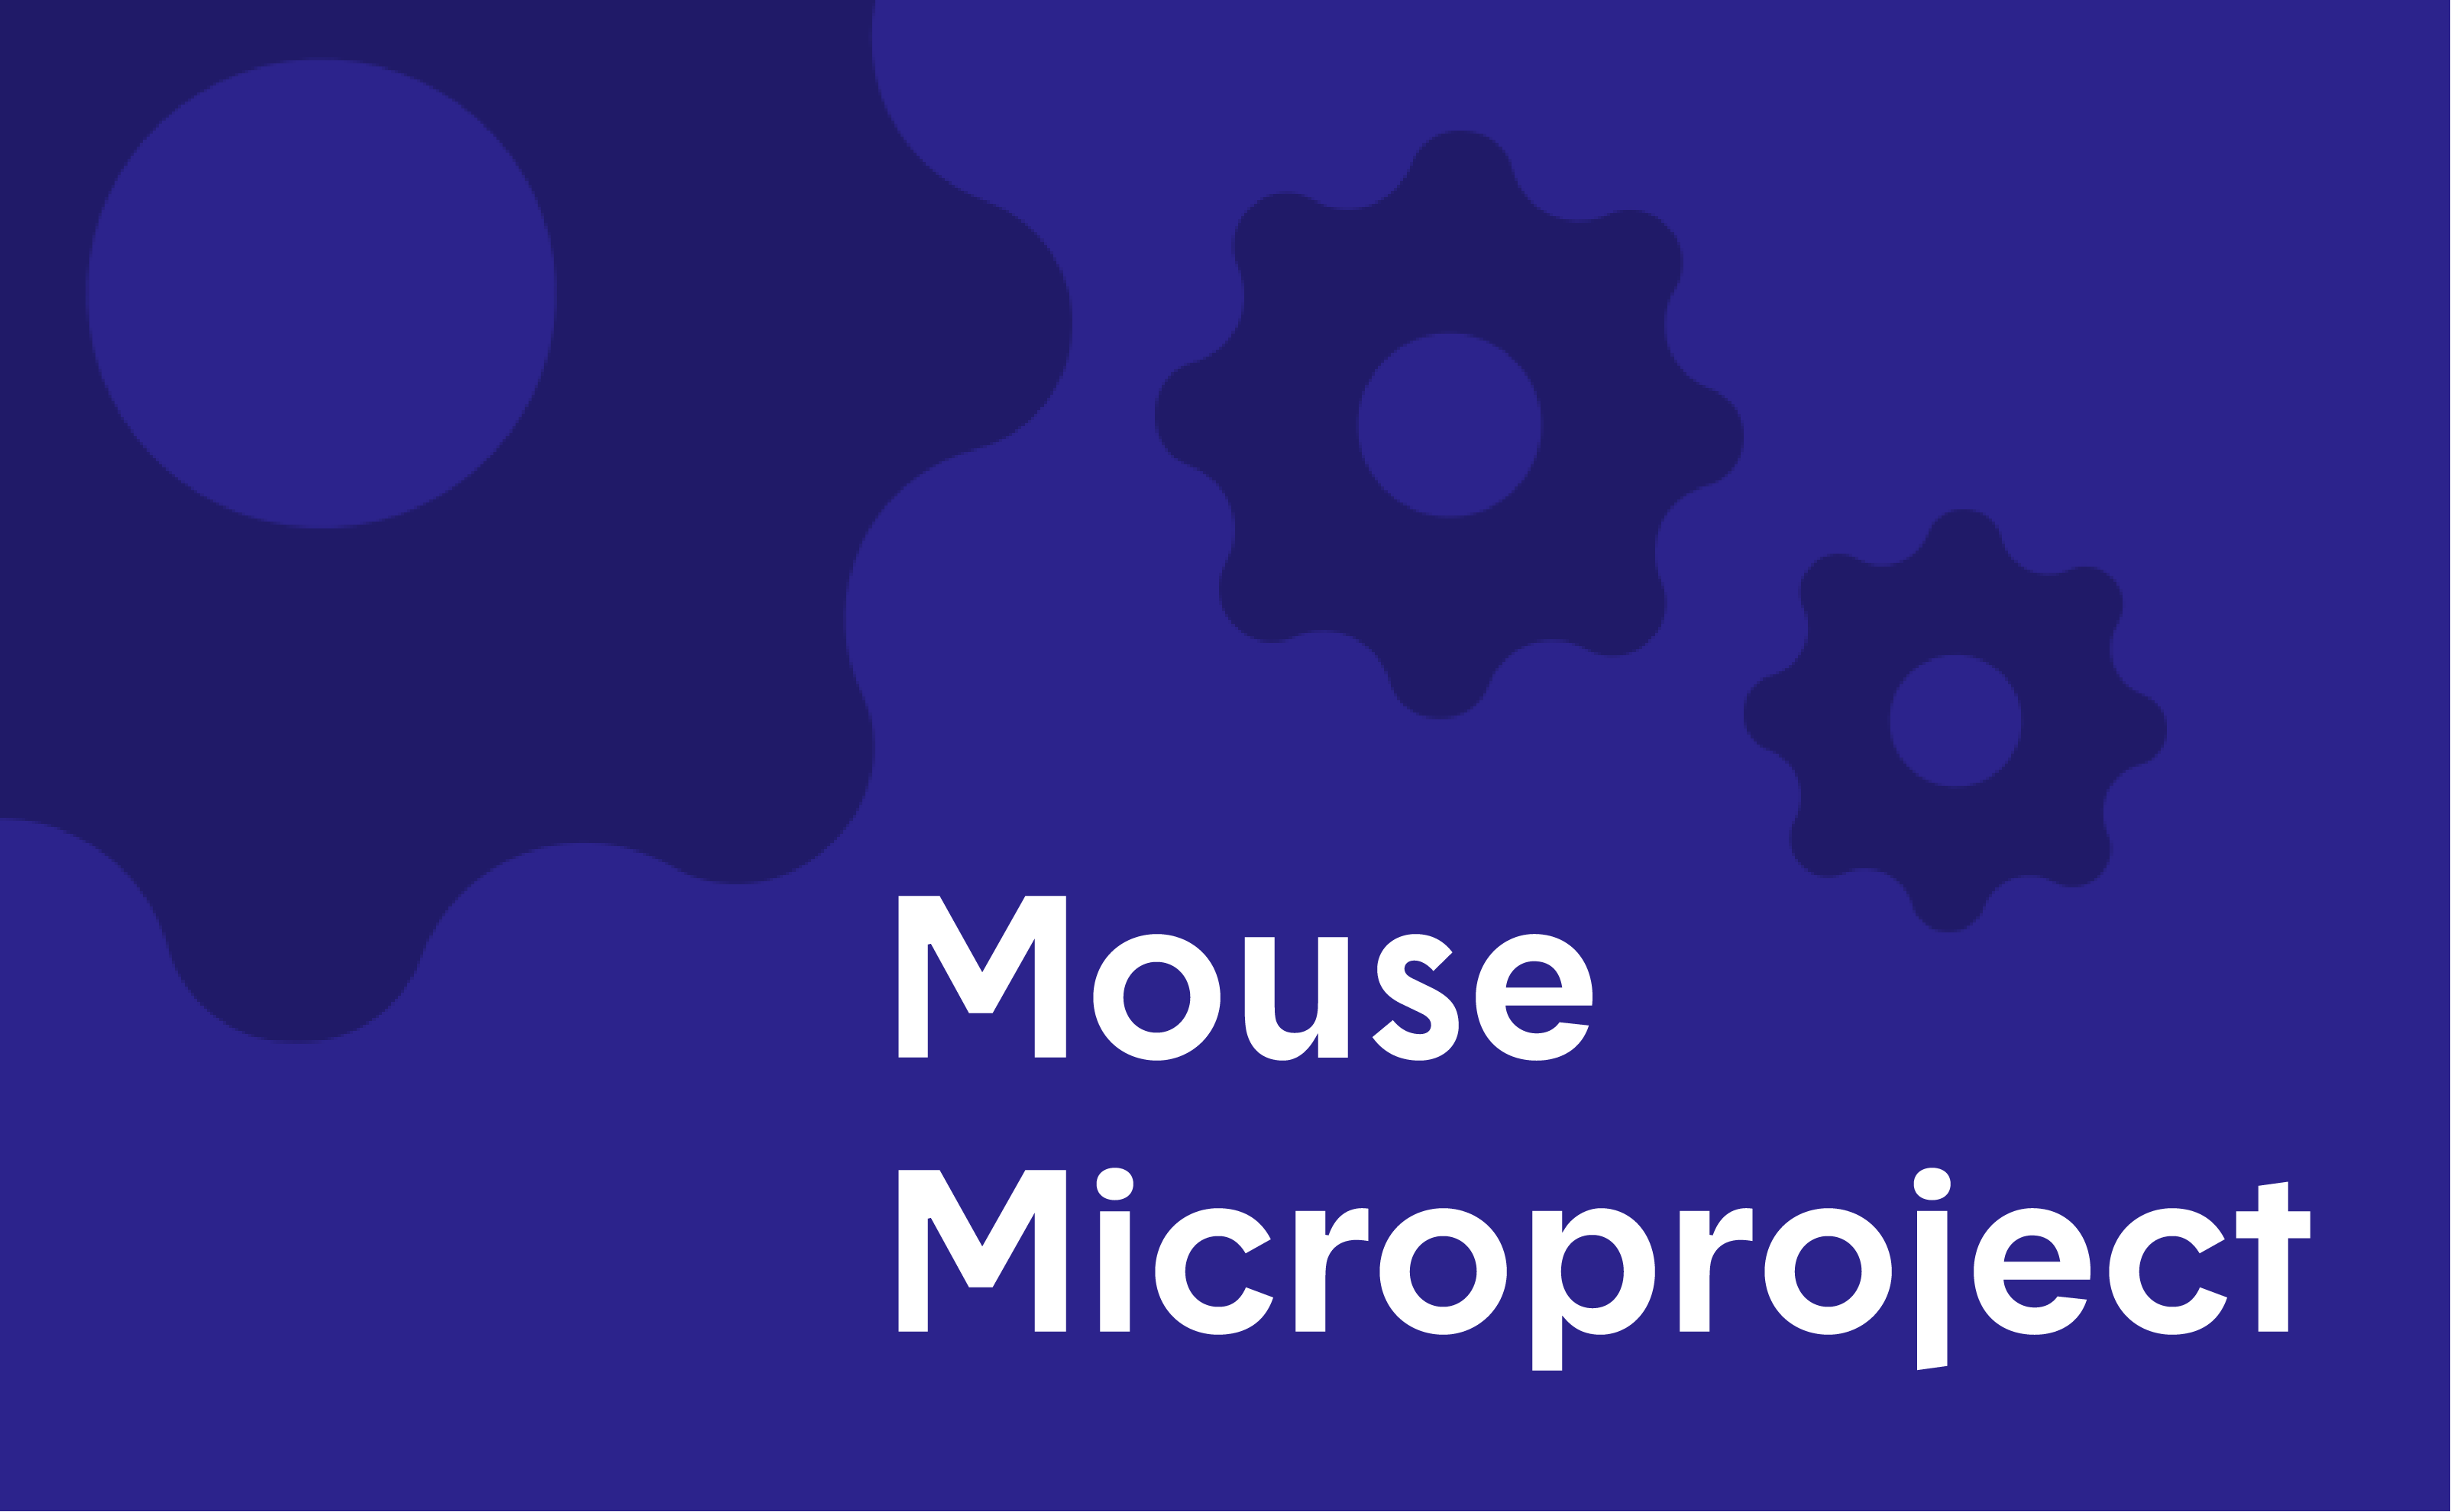 Blue image with three dark blue gears and white text reading "Mouse Microproject"